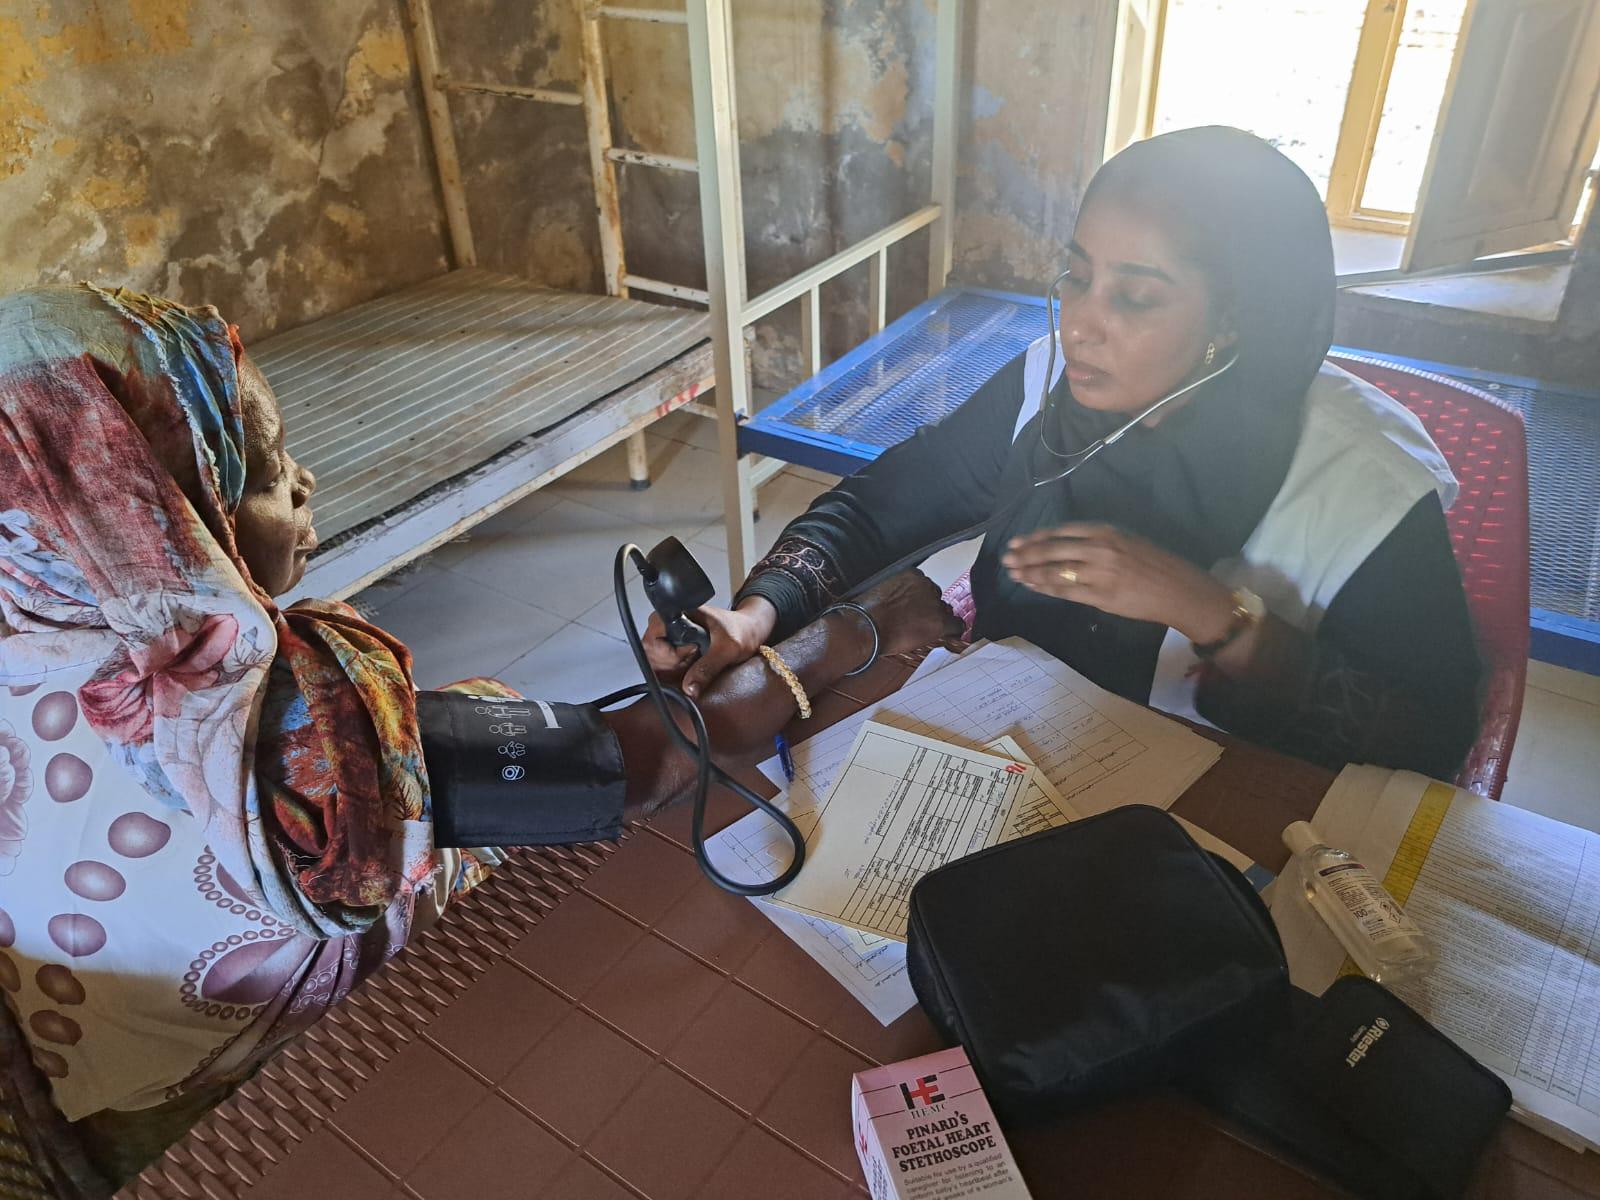 Yesterday, in Wad Madani, Sudan, an MSF team started providing lifesaving healthcare through mobile clinics for hundreds of displaced people fleeing violence in Khartoum. 